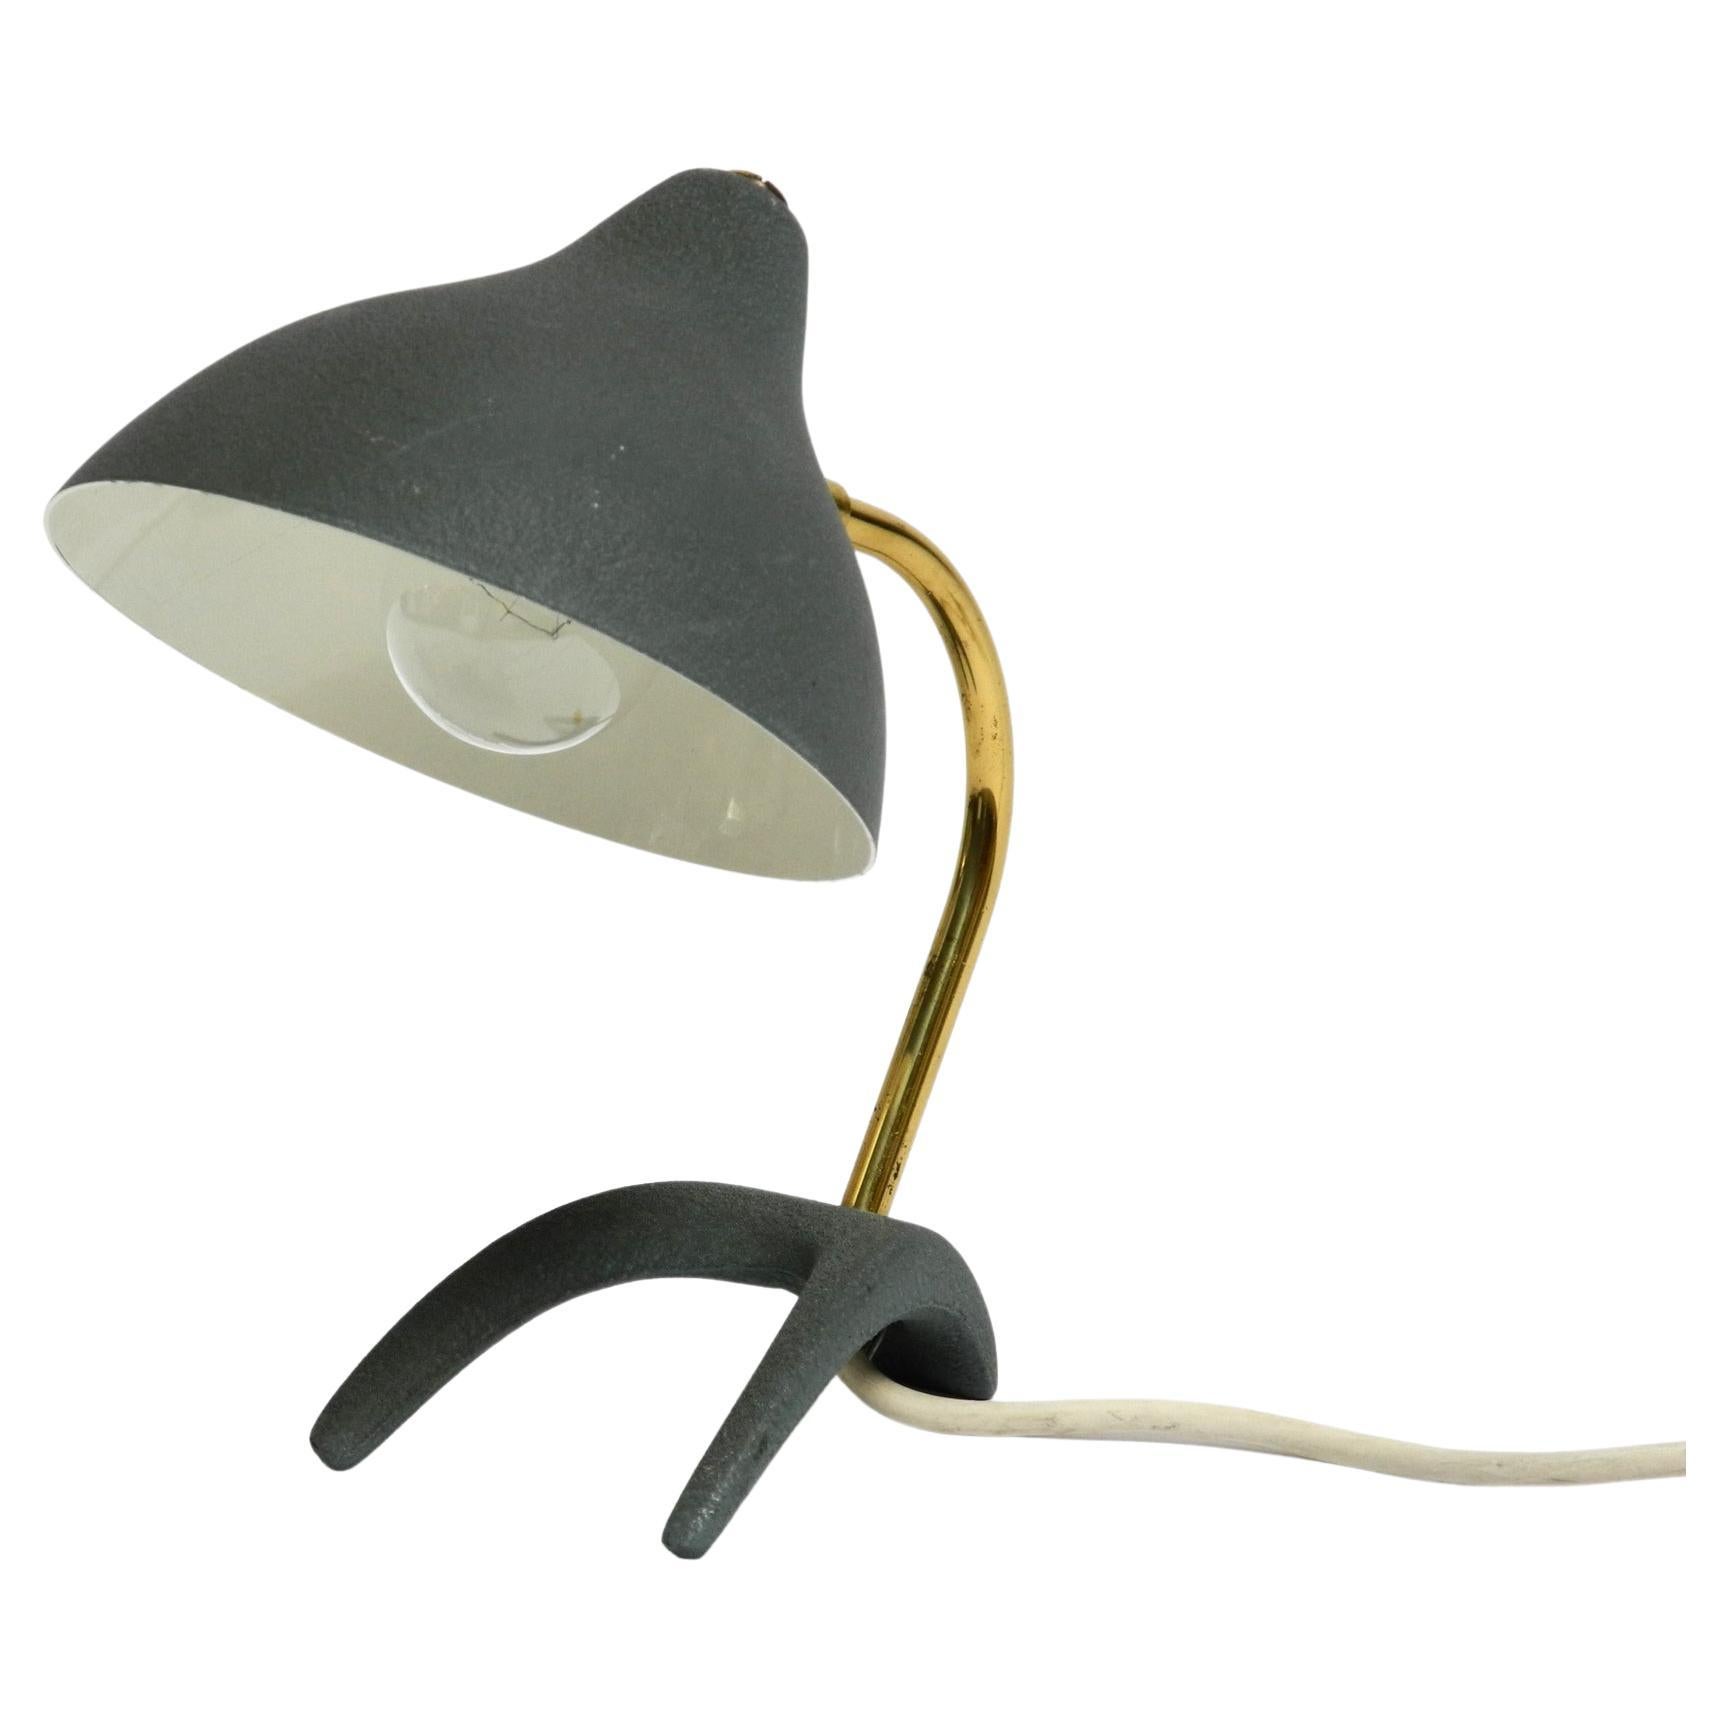 Very nice Mid Century Modern crow's foot table lamp in very good original condition.
Design by Louis Kalff. Beautiful design with a movable lampshade.
Painted in gray green by using the shrink paint process.
Aluminum lampshade, brass neck and metal